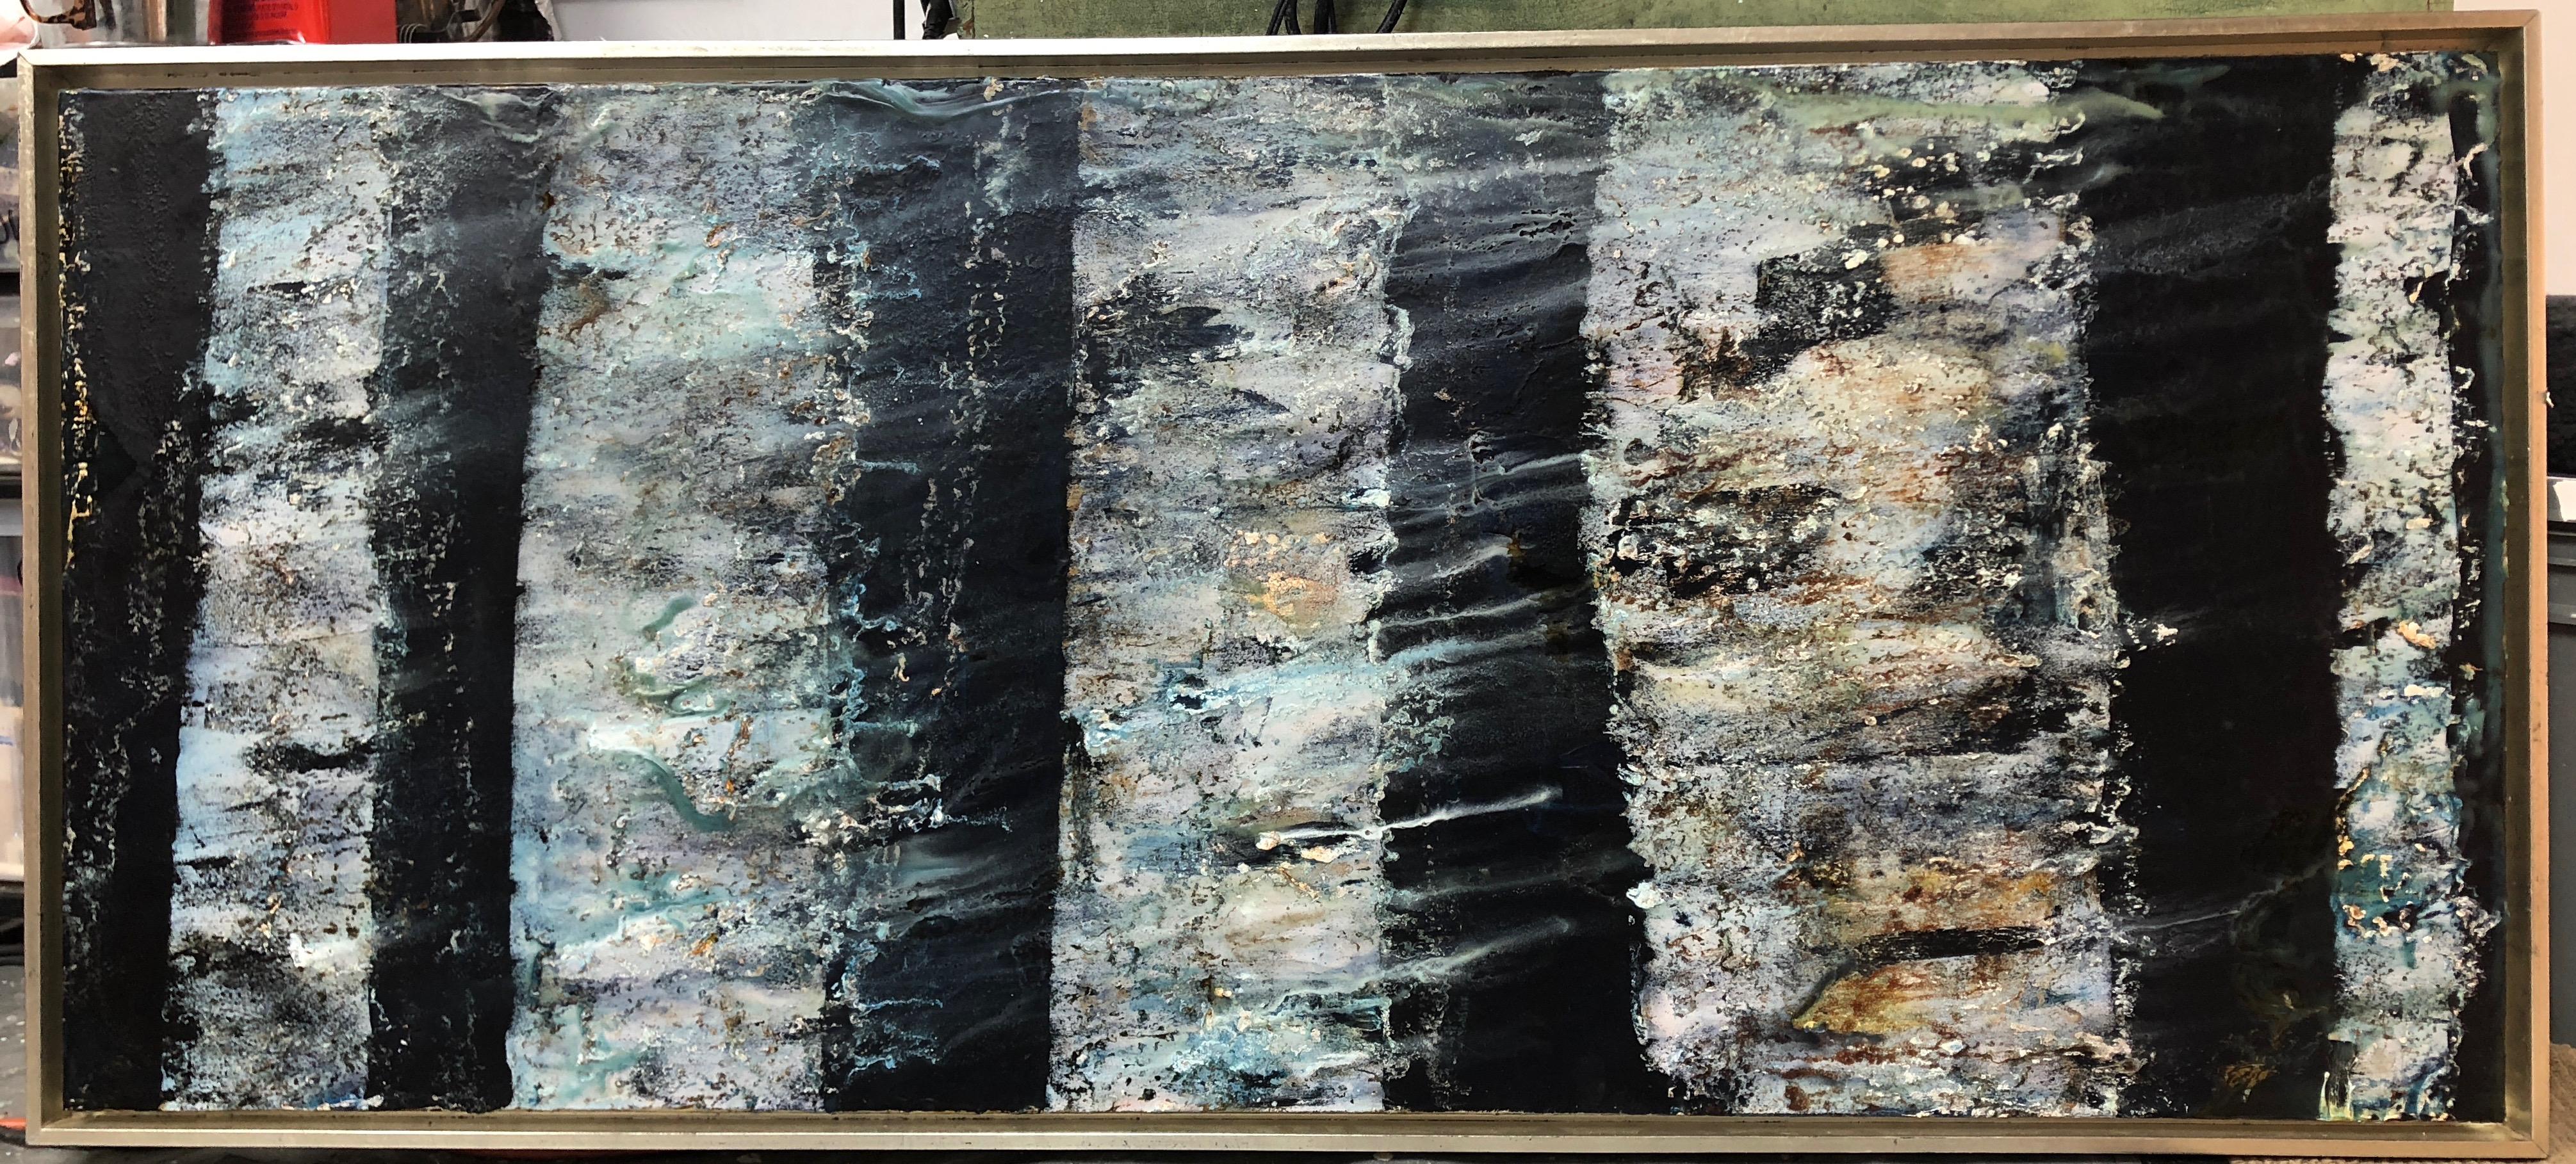 Series: Deep Woods

Encaustic oil and shellac

Size: 28" x 58"

Using unconventional hardware - a blow torch, iron and other heated tools - along with paper, encaustics, photography, resin and natural materials, Bonfils’ uncommon painting and